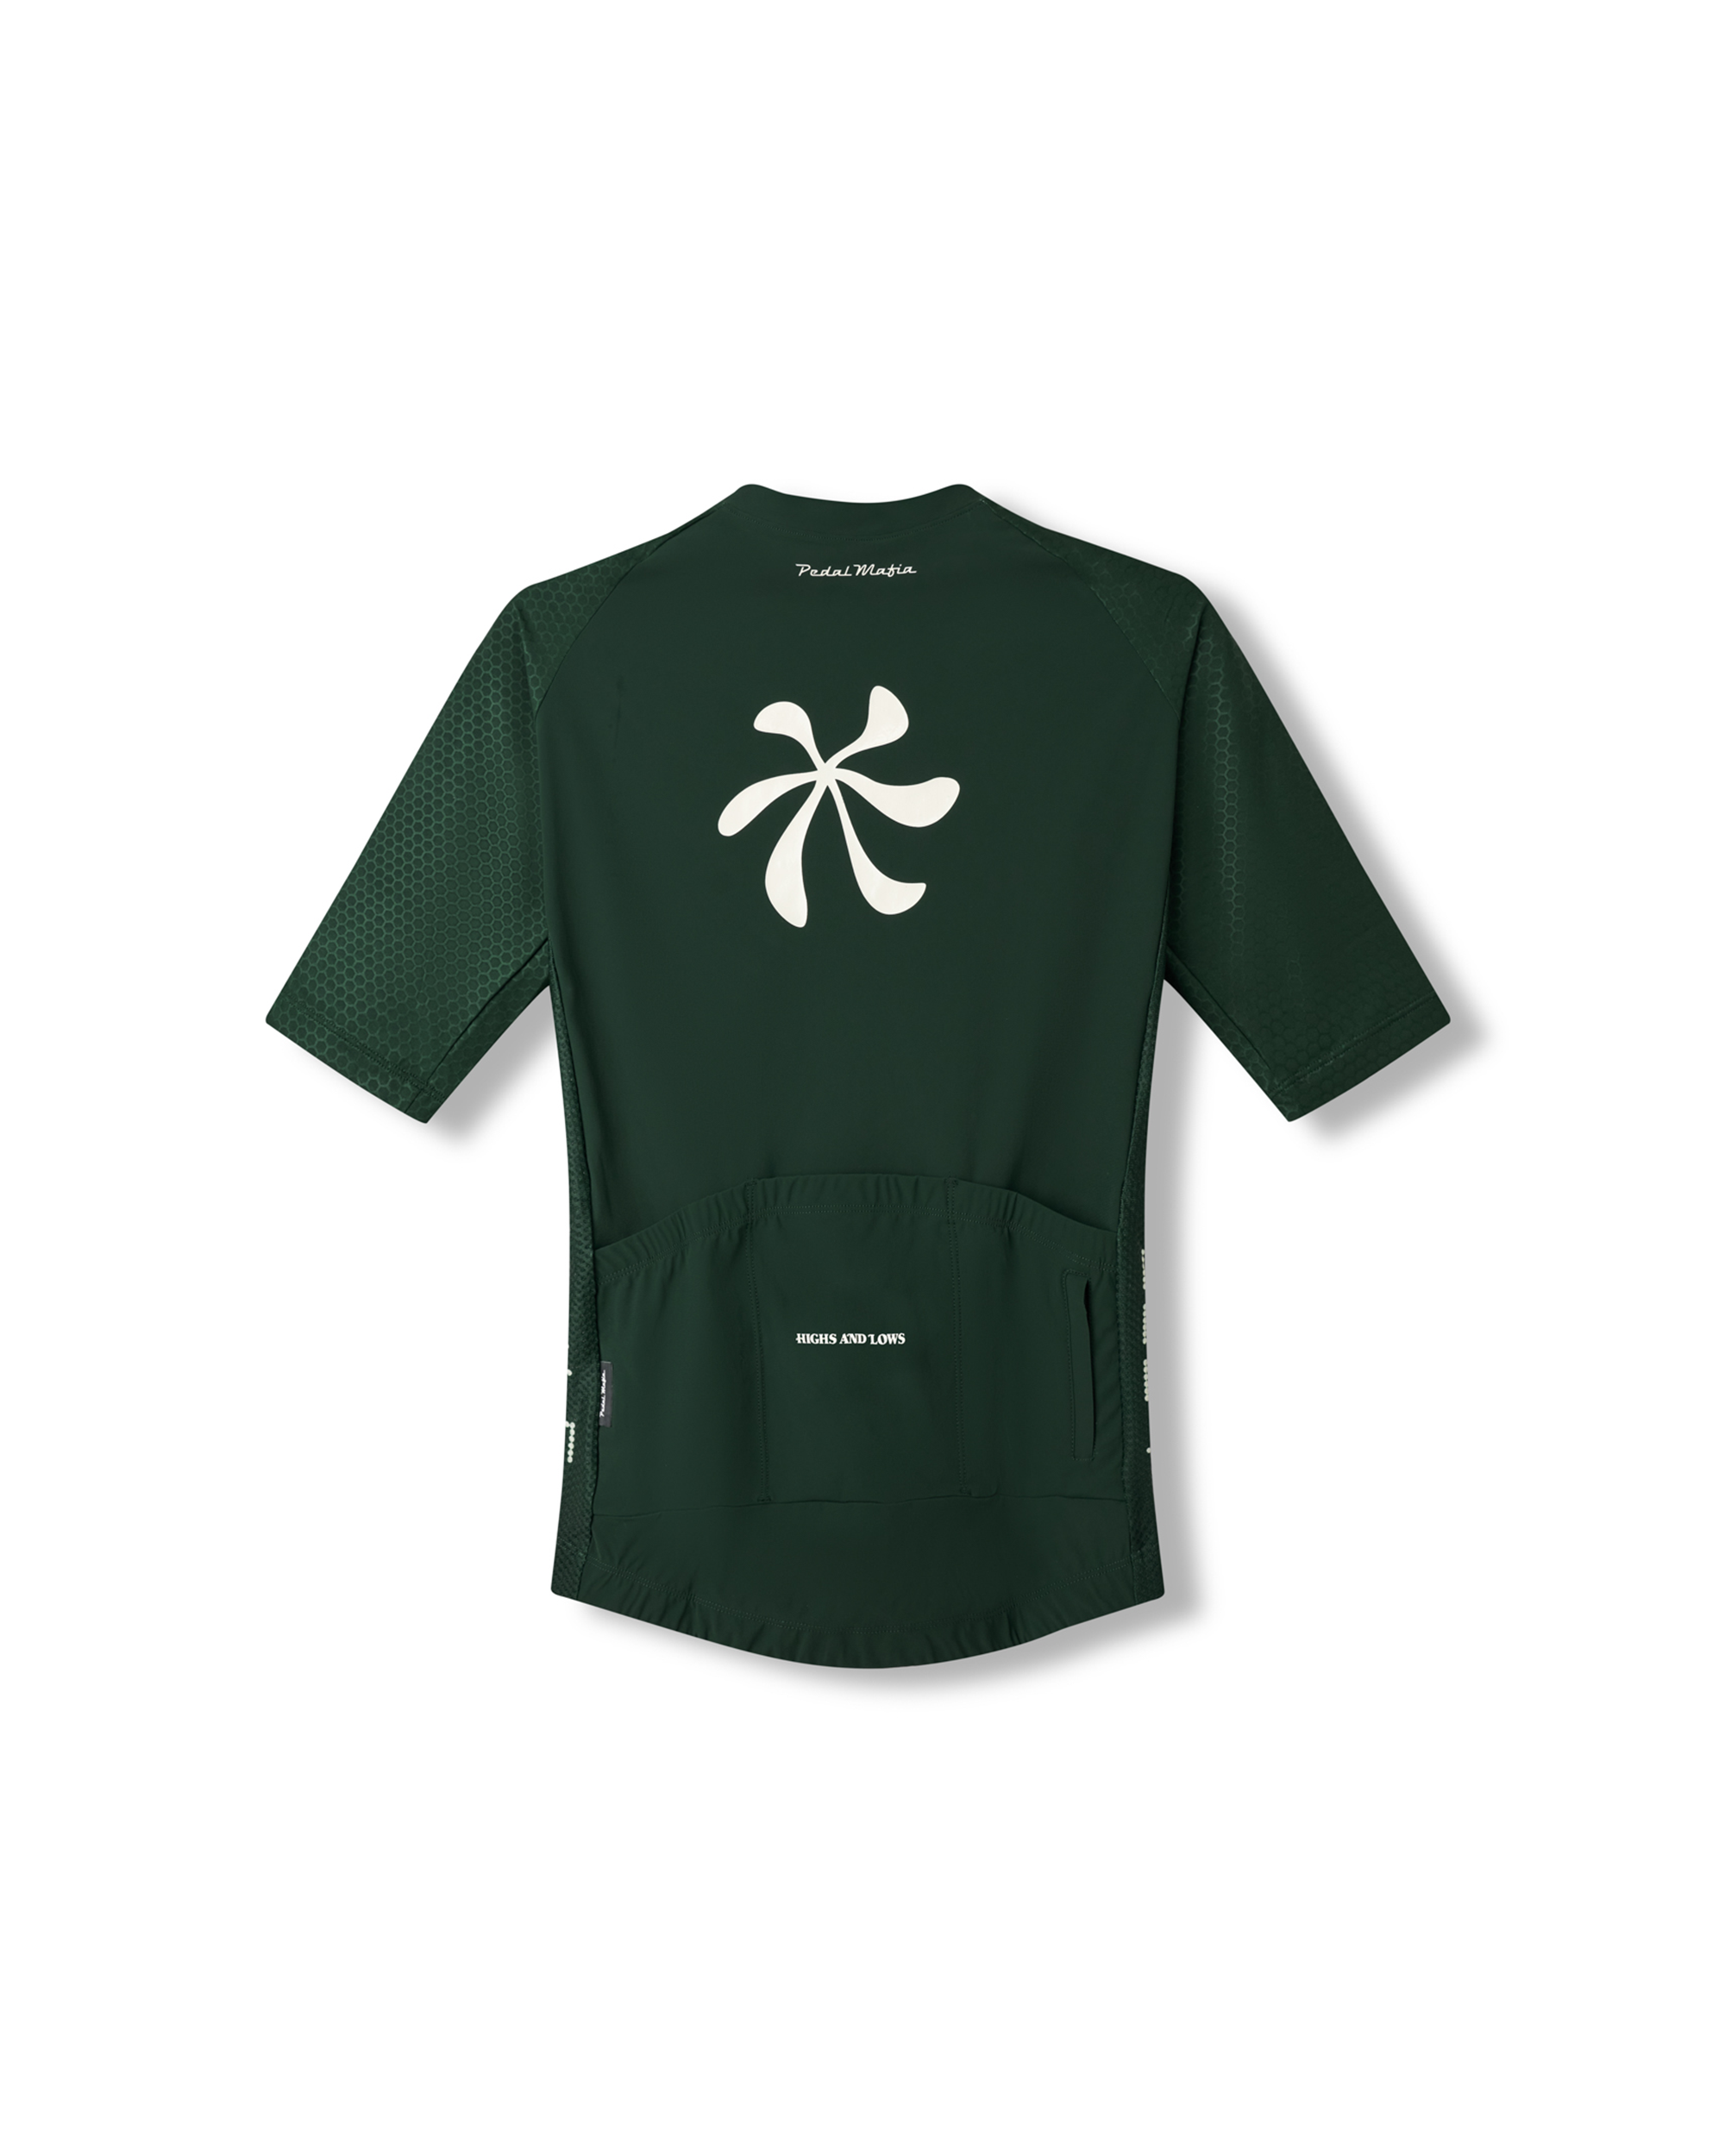 Pro Jersey - Life Cycle Pine